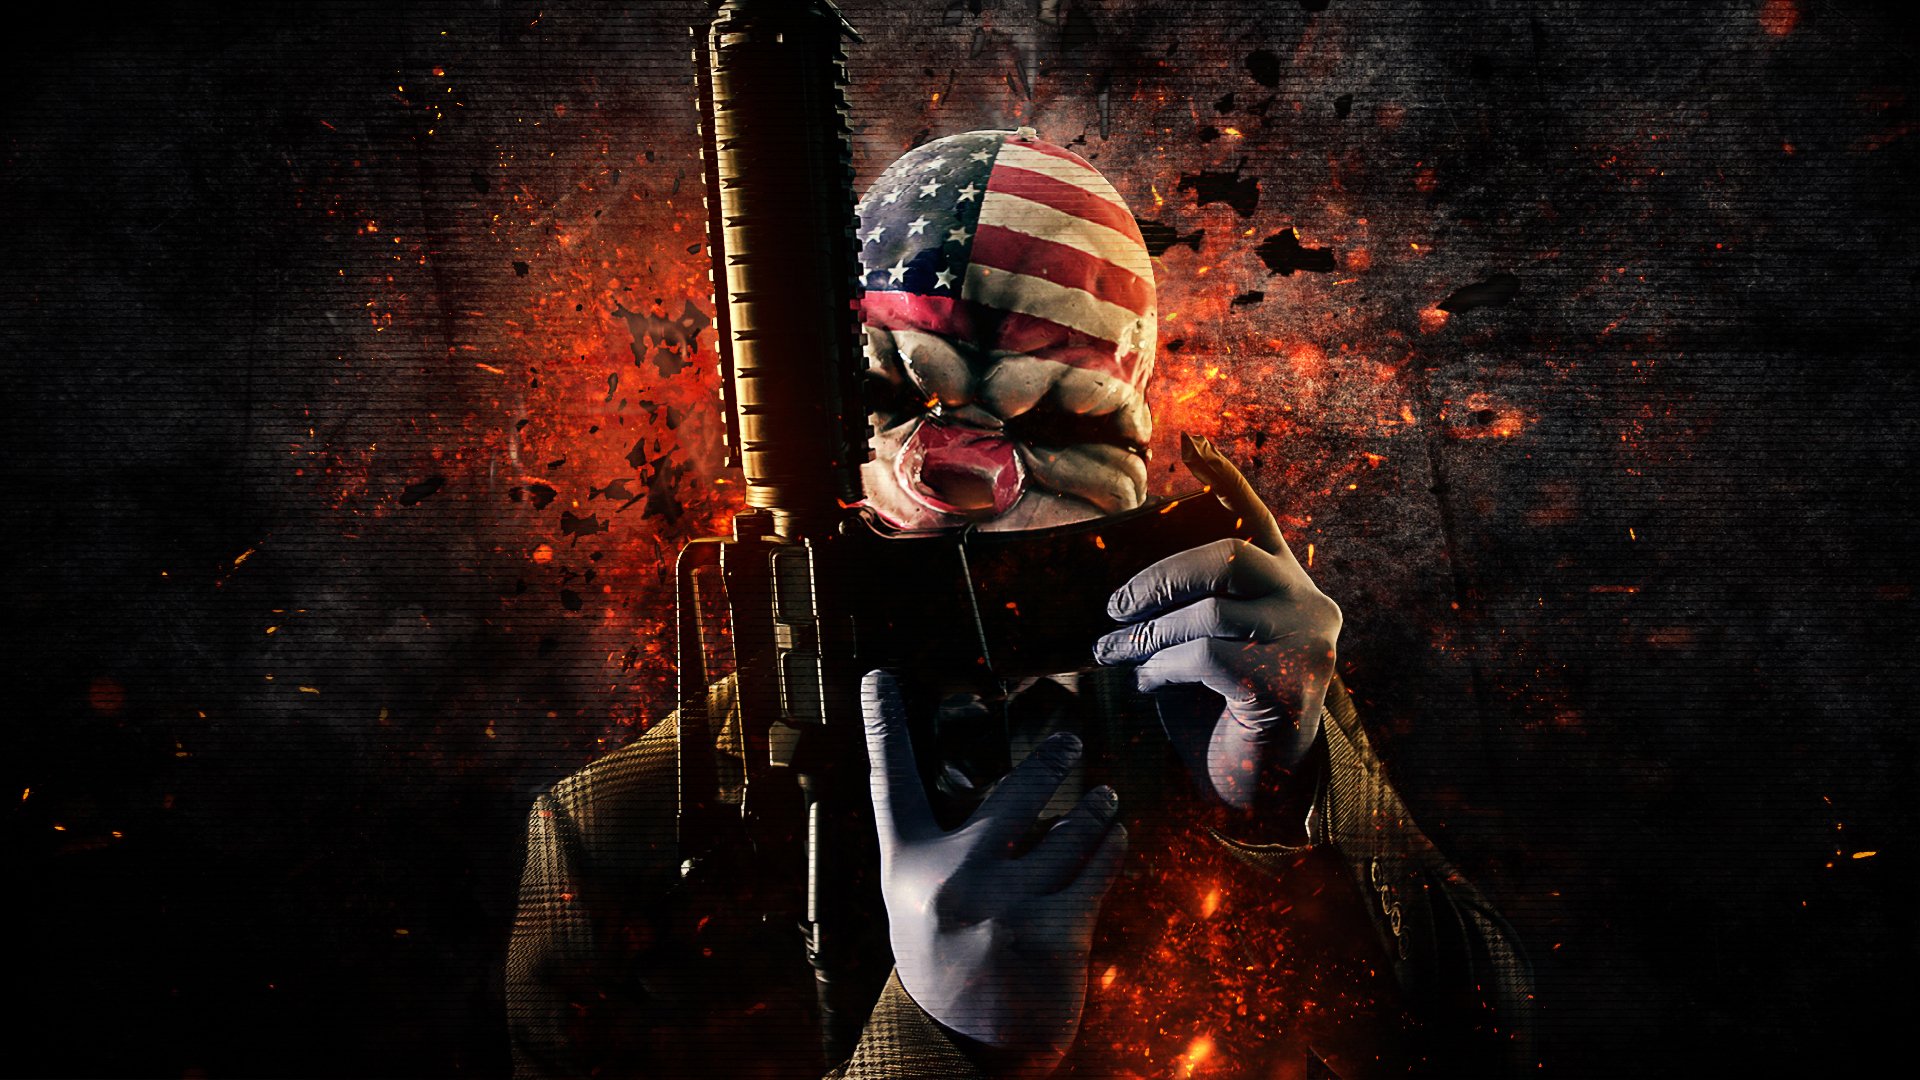 payday 2 selling weapons with mods